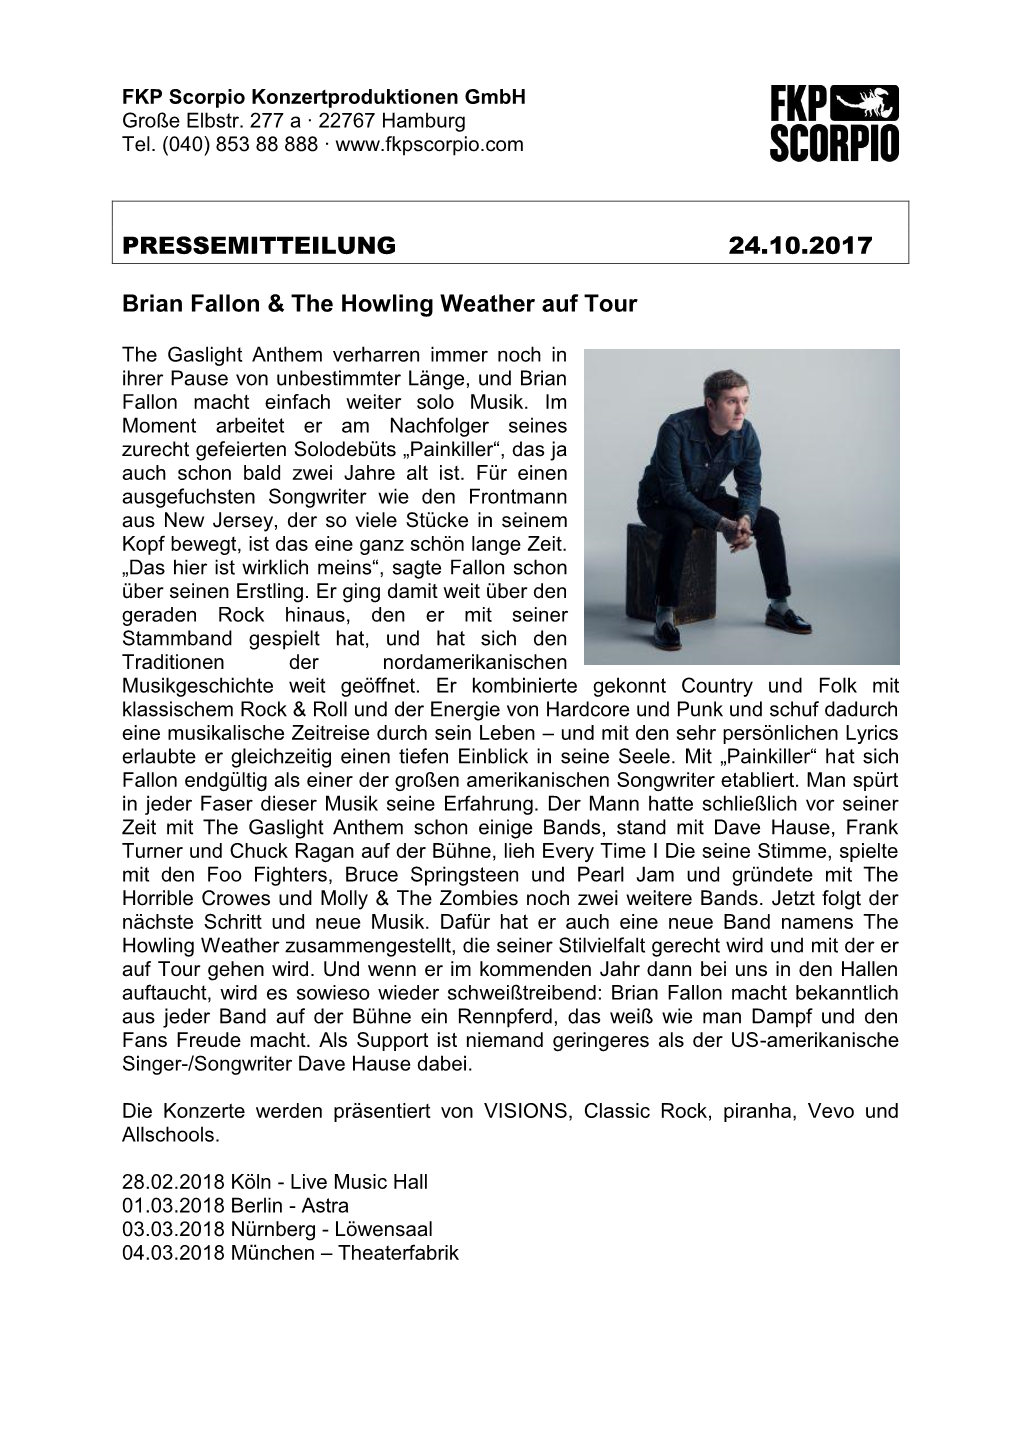 PRESSEMITTEILUNG 24.10.2017 Brian Fallon & the Howling